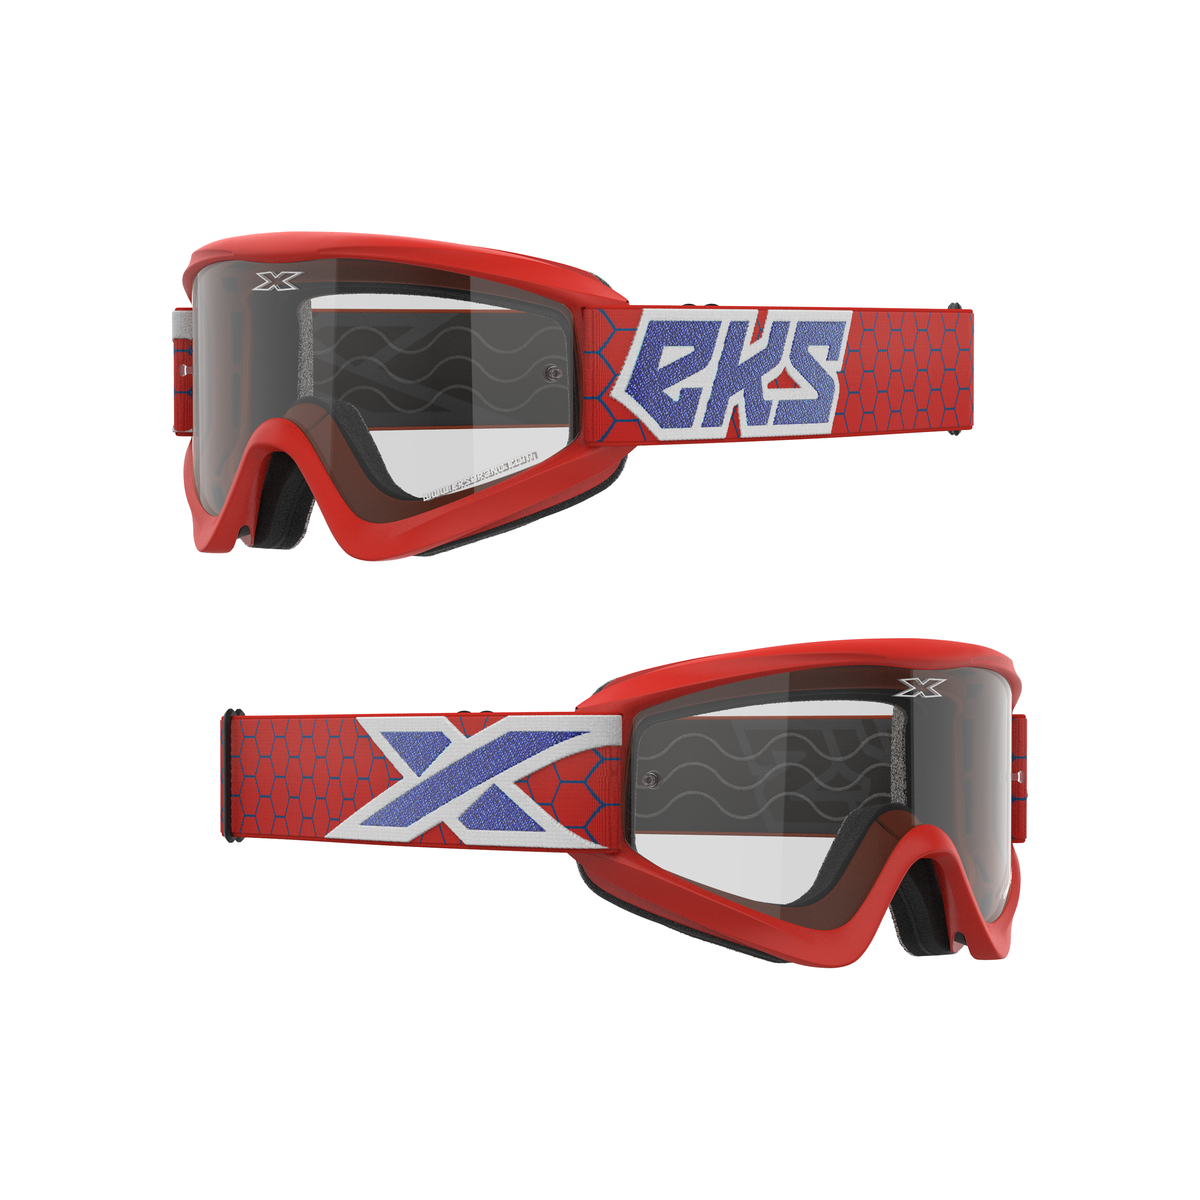 GOX Flat-Out Clear Goggle Red, White, Blue Metallic